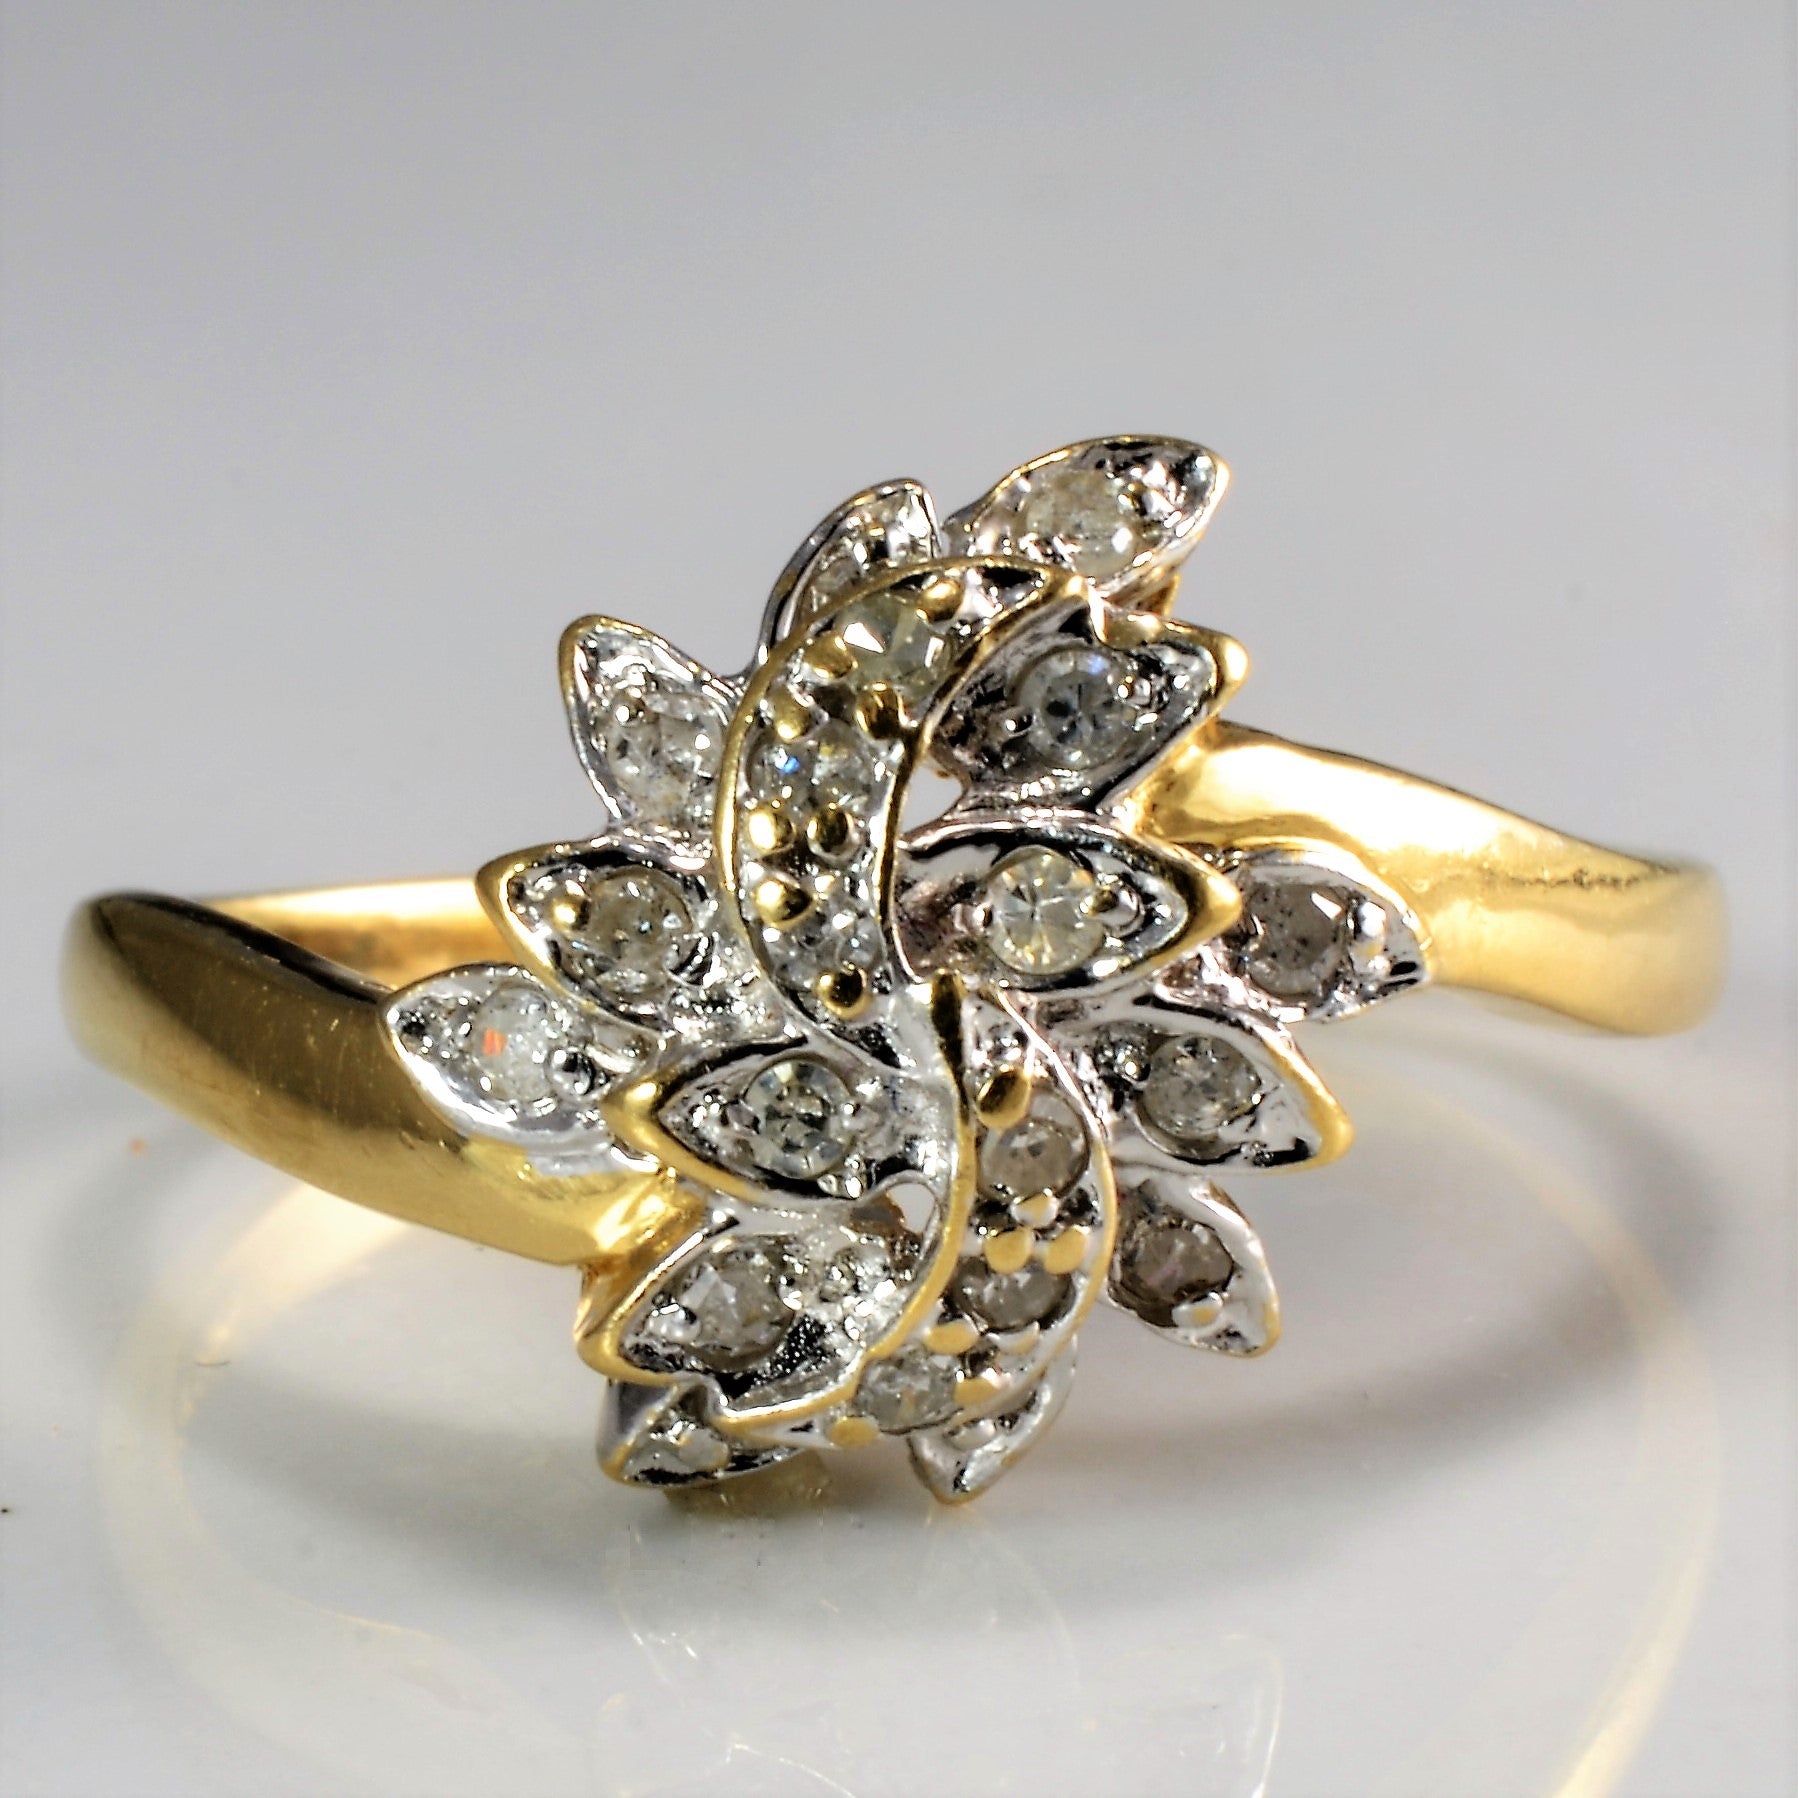 Floral Inspired Cluster Diamond Ring | 0.15 ctw, SZ 7.5 |